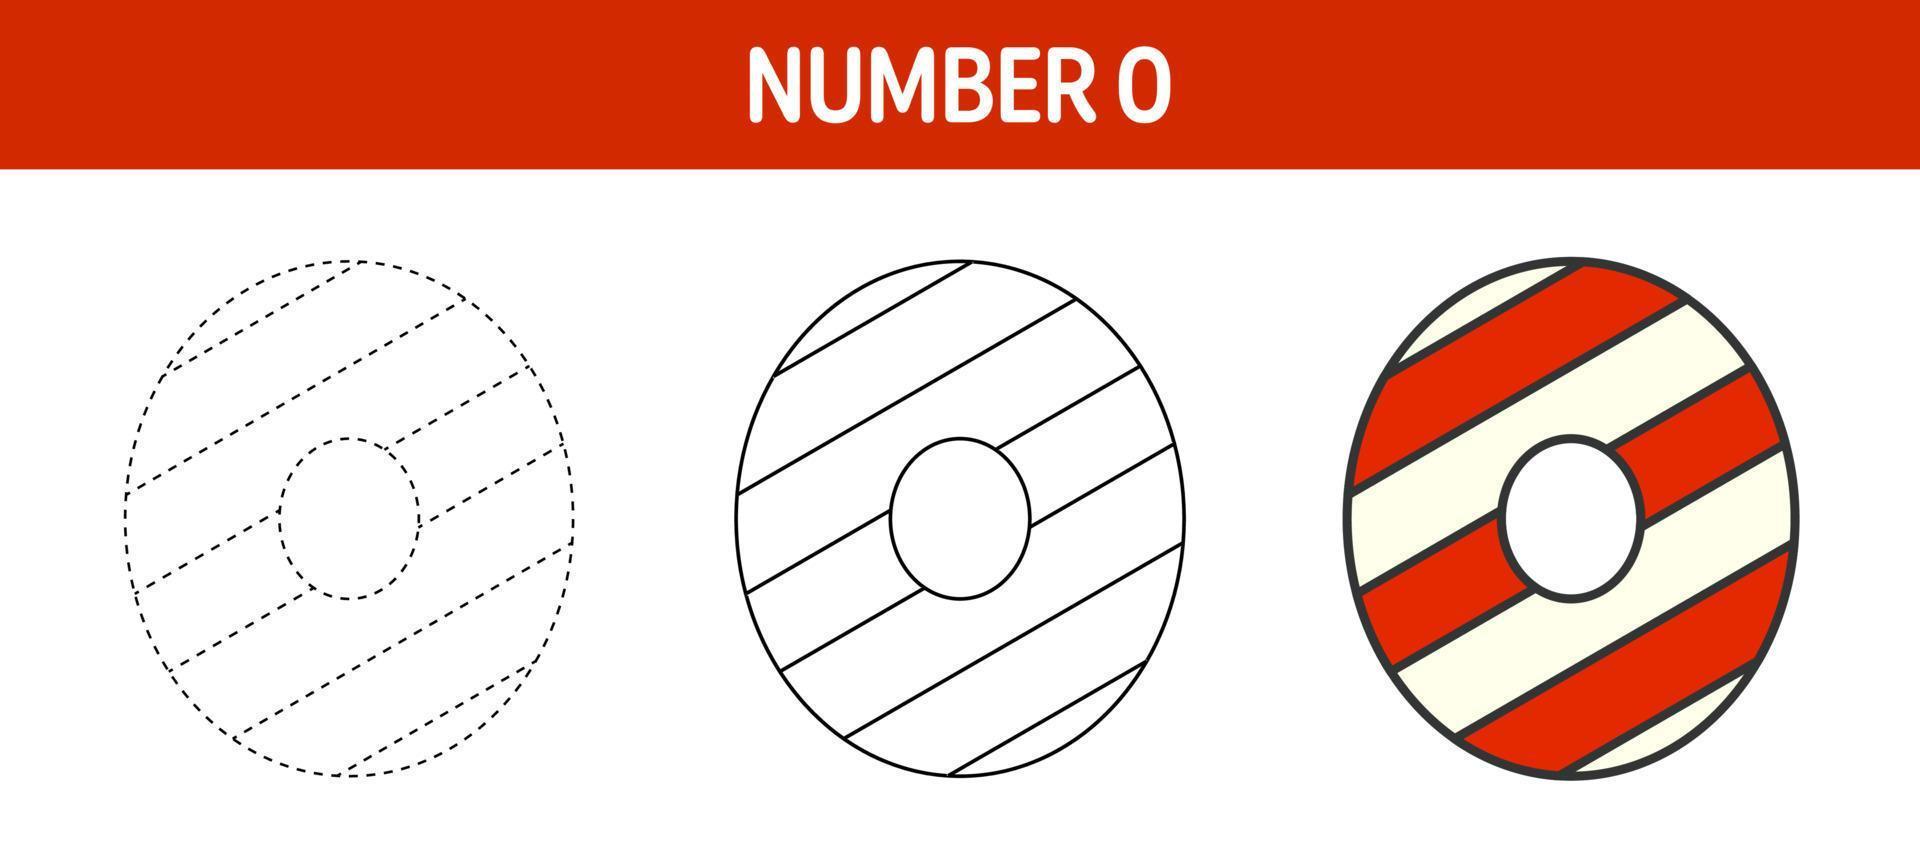 Number 0 Candy Cane, tracing and coloring worksheet for kids vector